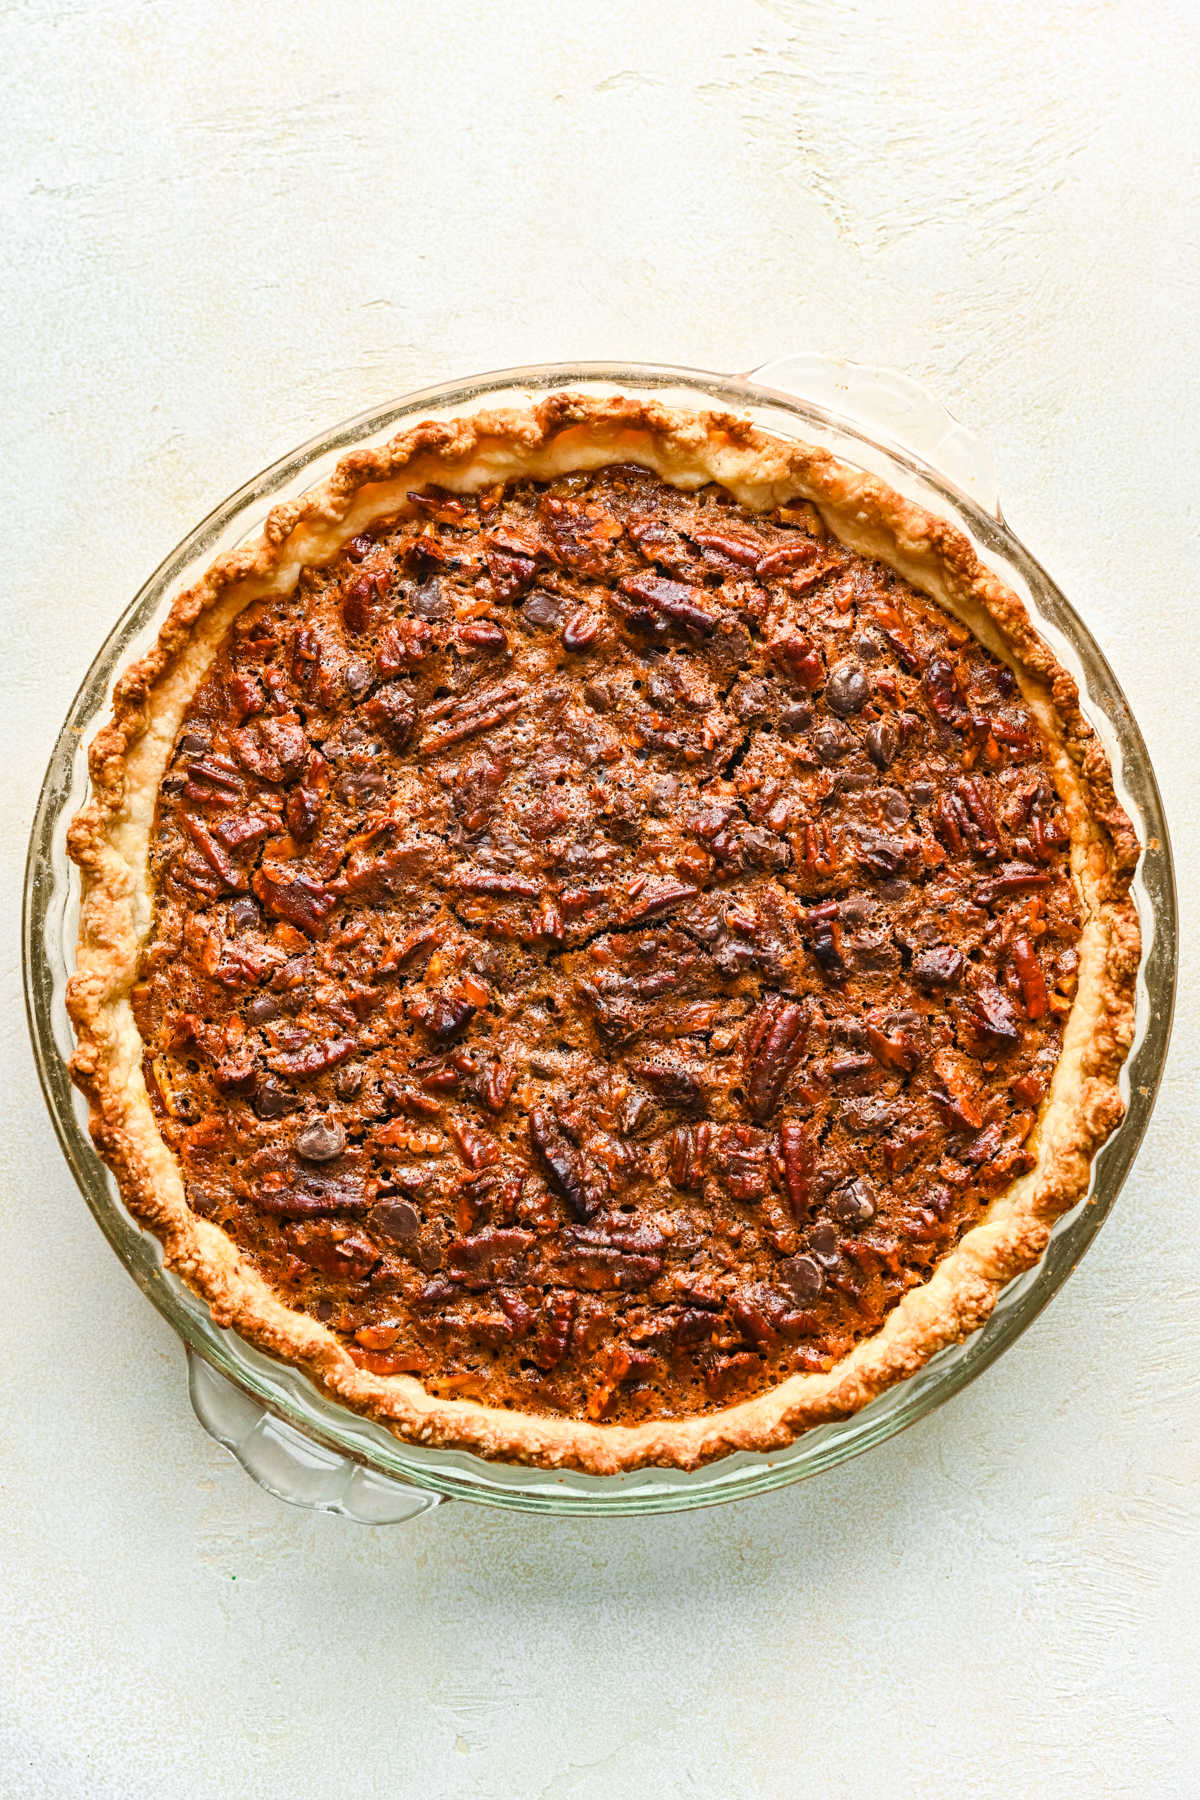 Baked chocolate pecan pie in a glass pie pan.